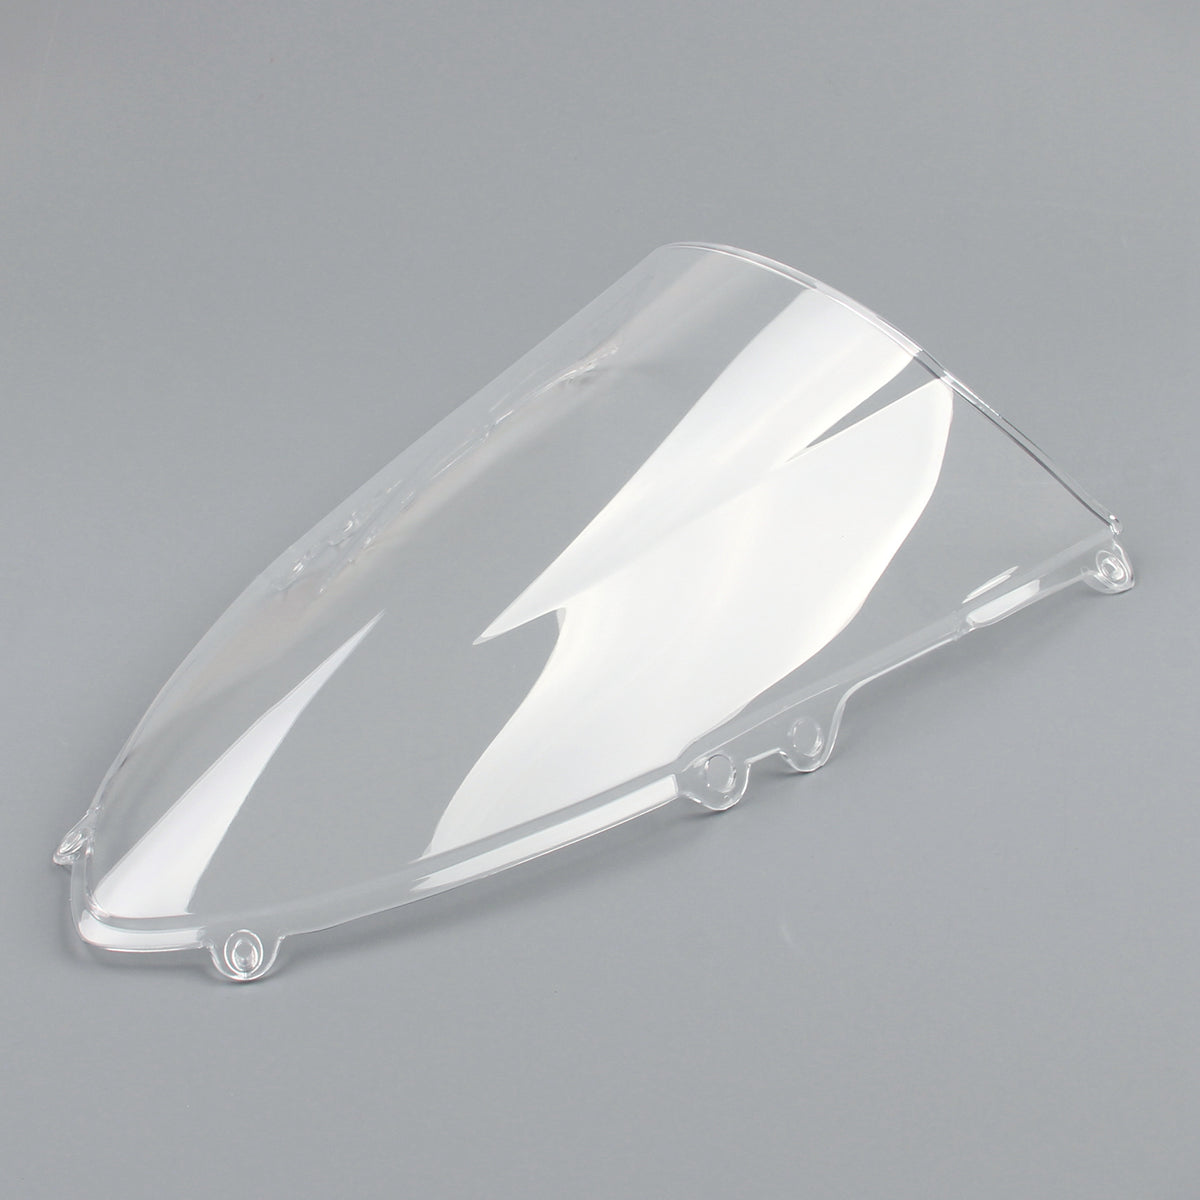 Windshield WindScreen For Ducati Panigale 899/1199/1199R/1199S 2011-2017 White Generic